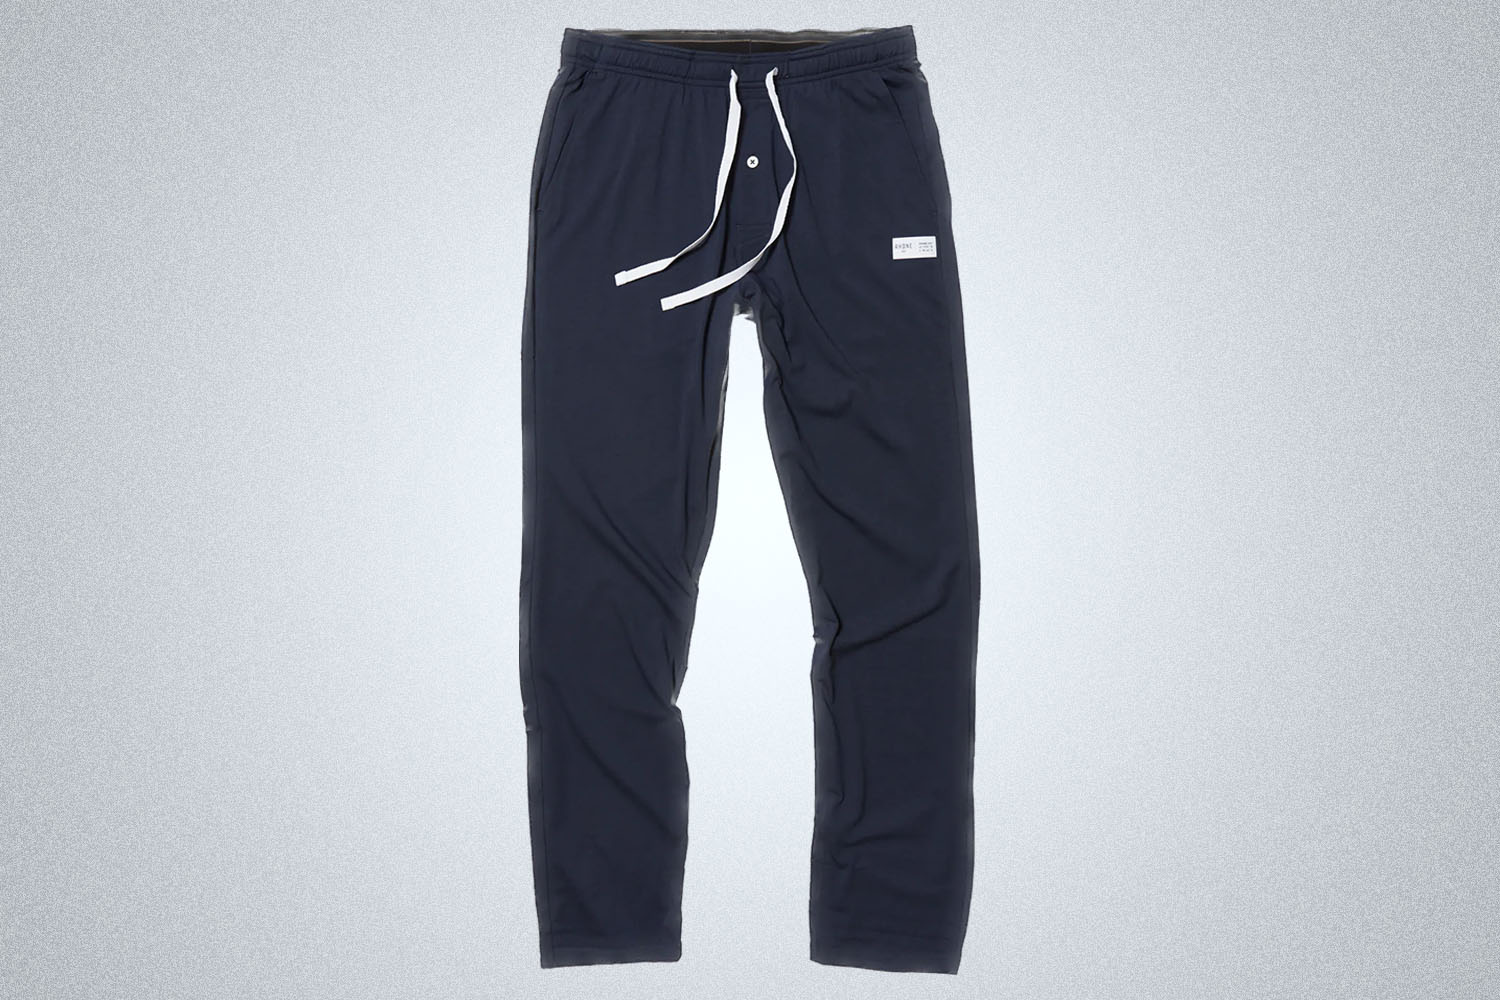 a pair of Rhone Element Lounge Pant on a grey background